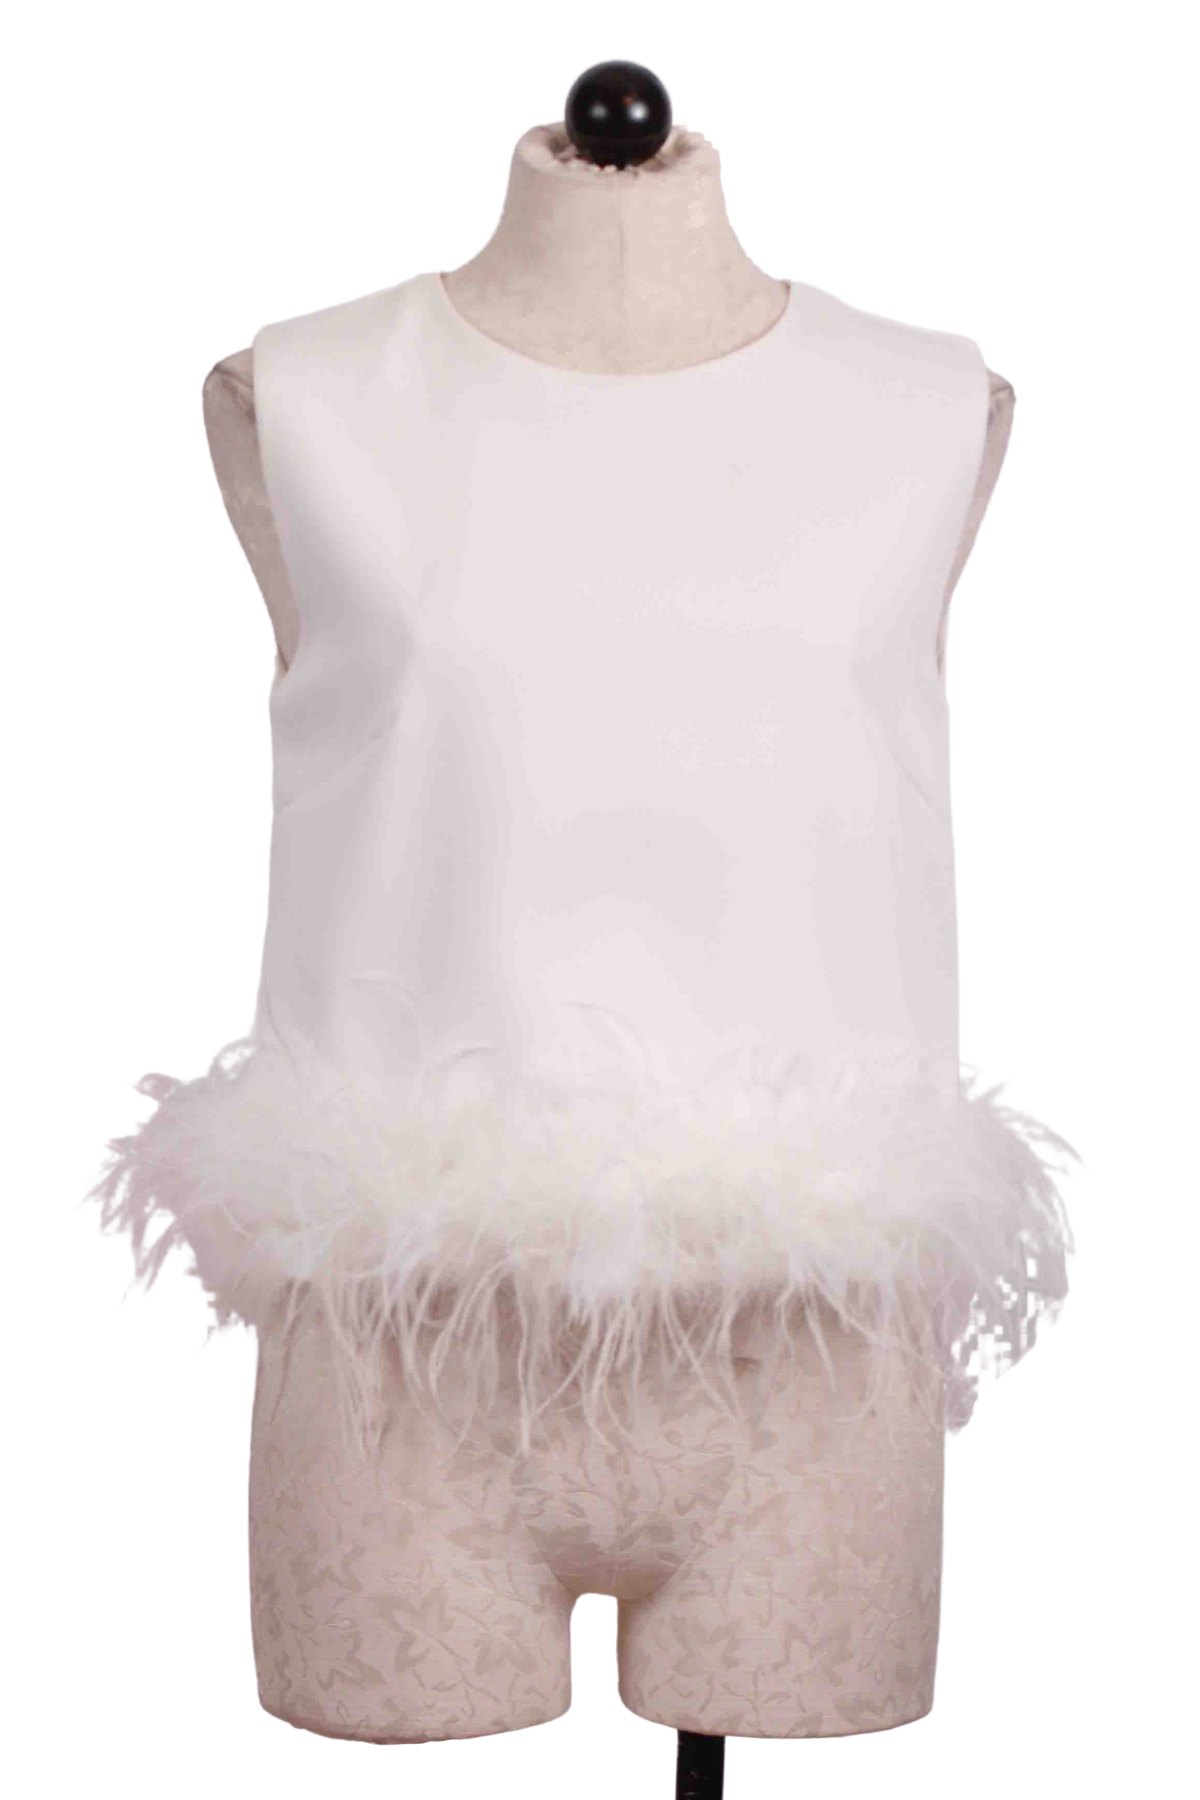 White Sleeveless Cotton Top with Ostrich Feather Bottom by Jessie Liu